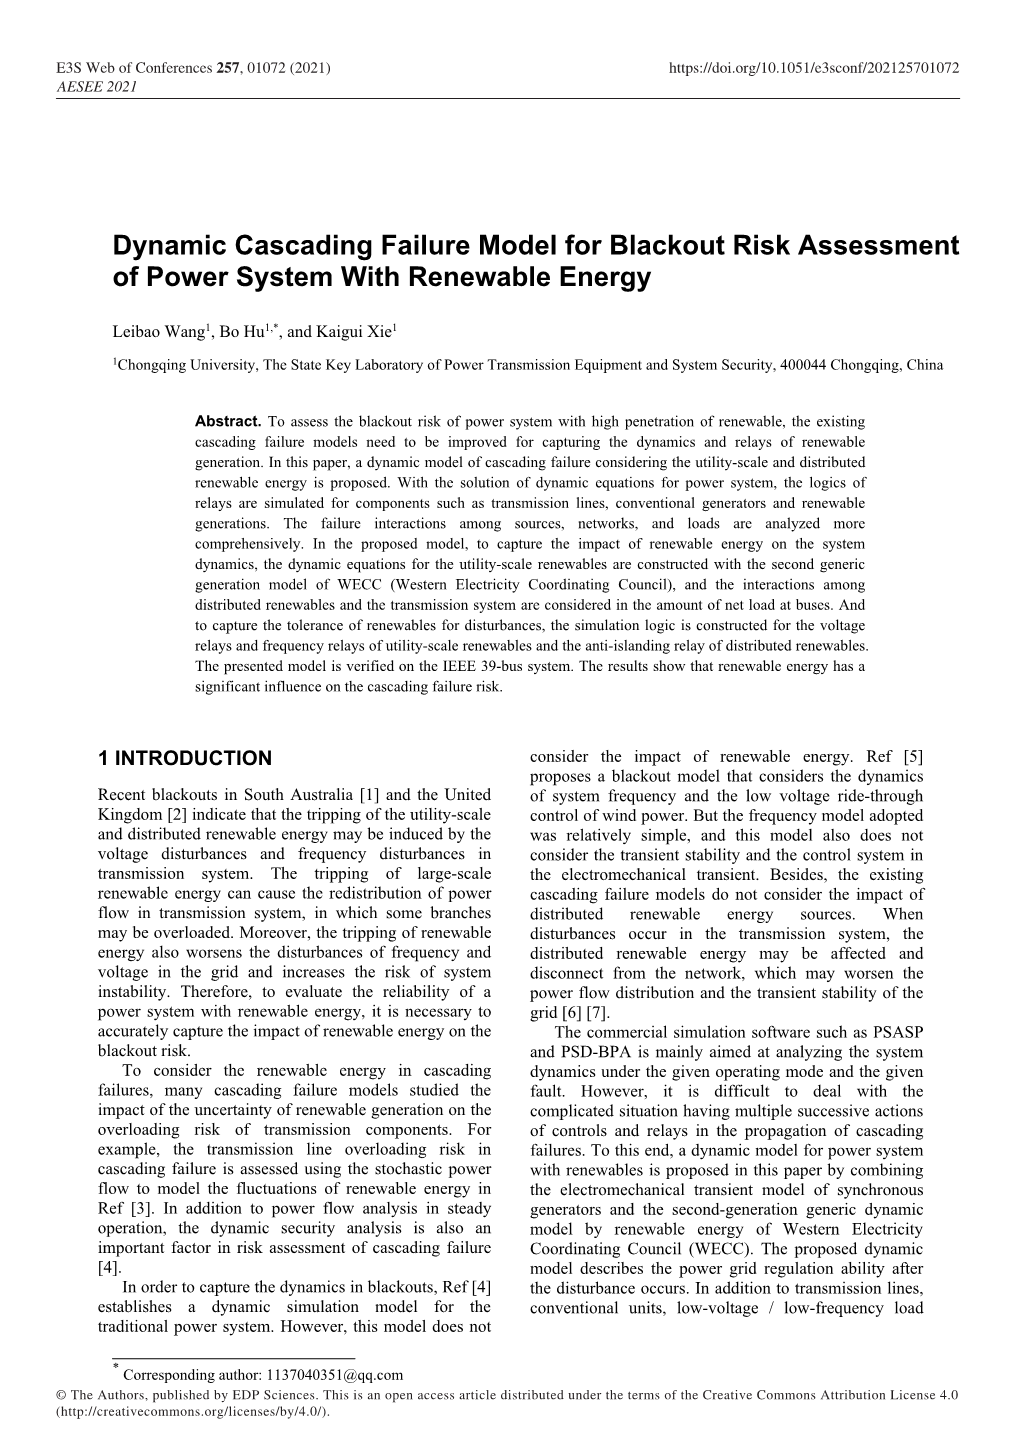 Dynamic Cascading Failure Model for Blackout Risk Assessment of Power System with Renewable Energy